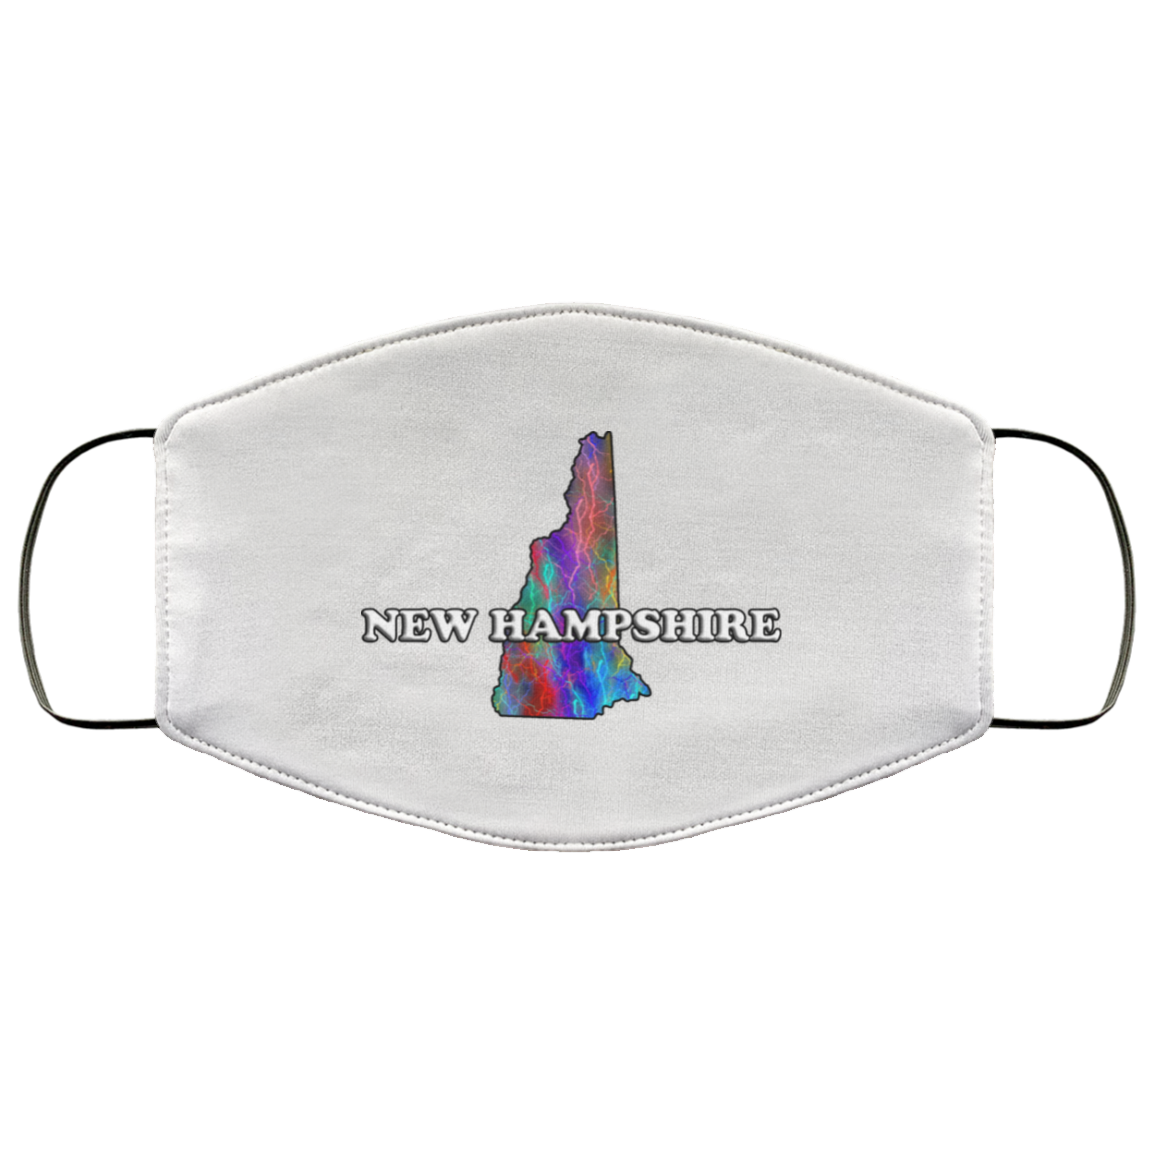 New Hampshire 2 Layer Protective Face Mask